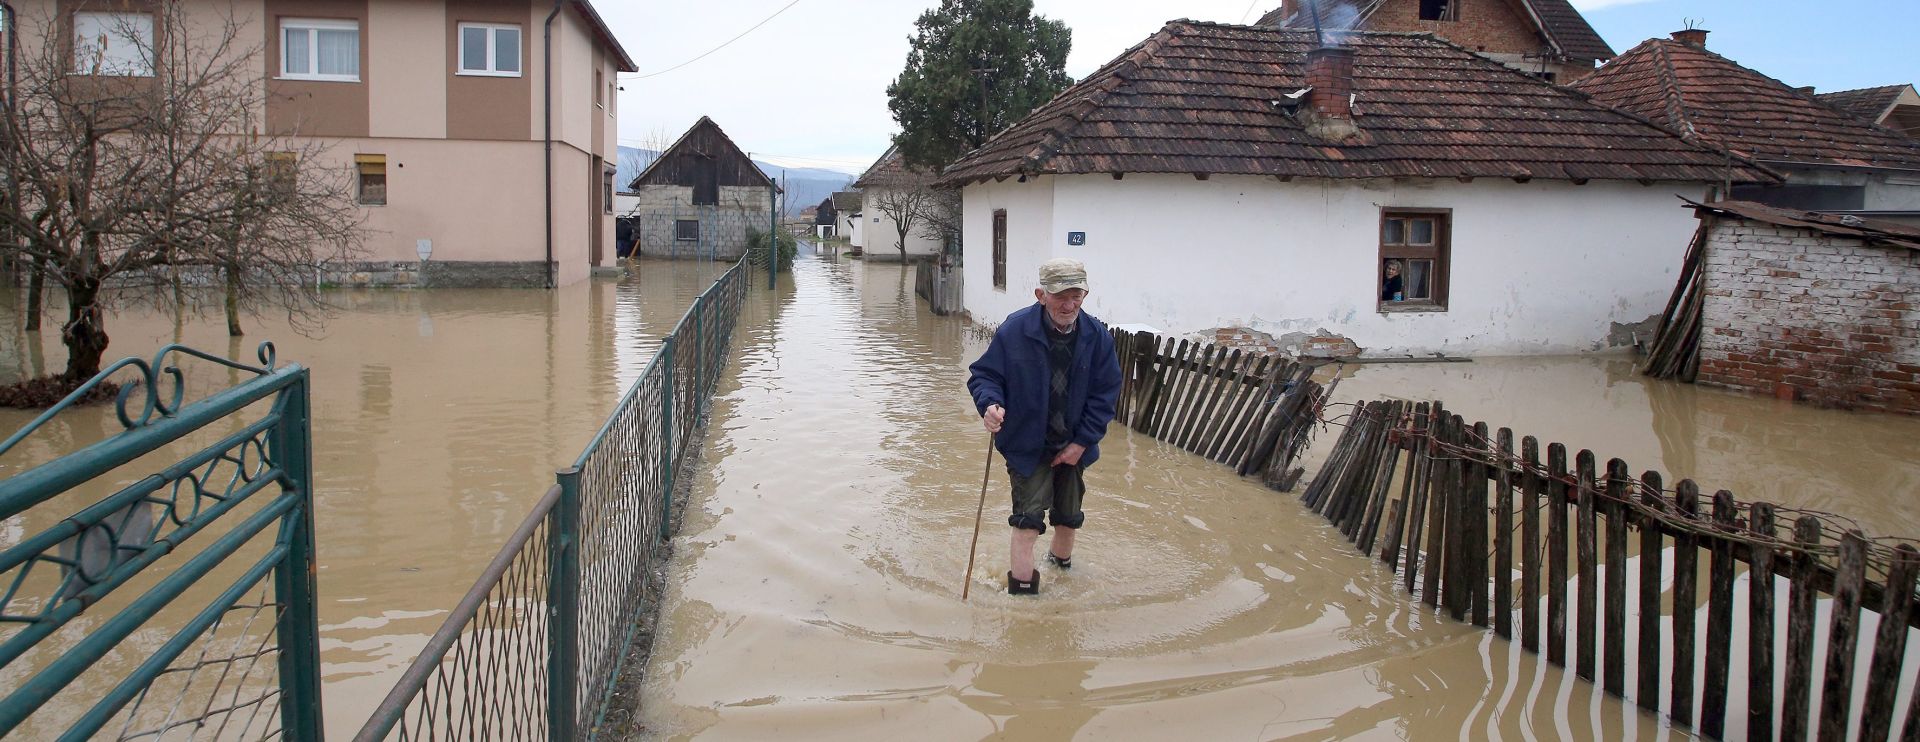 epa05199481 An old man wades through a flooded village near Pozega, some 155 kilometers south-west of the capital Belgrade, Serbia, 07 March 2016. Rain-swollen rivers have flooded dozens of houses, roads and farming land and caused local authorities in several municipalities to declare the state of emergency.  EPA/KOCA SULEJMANOVIC